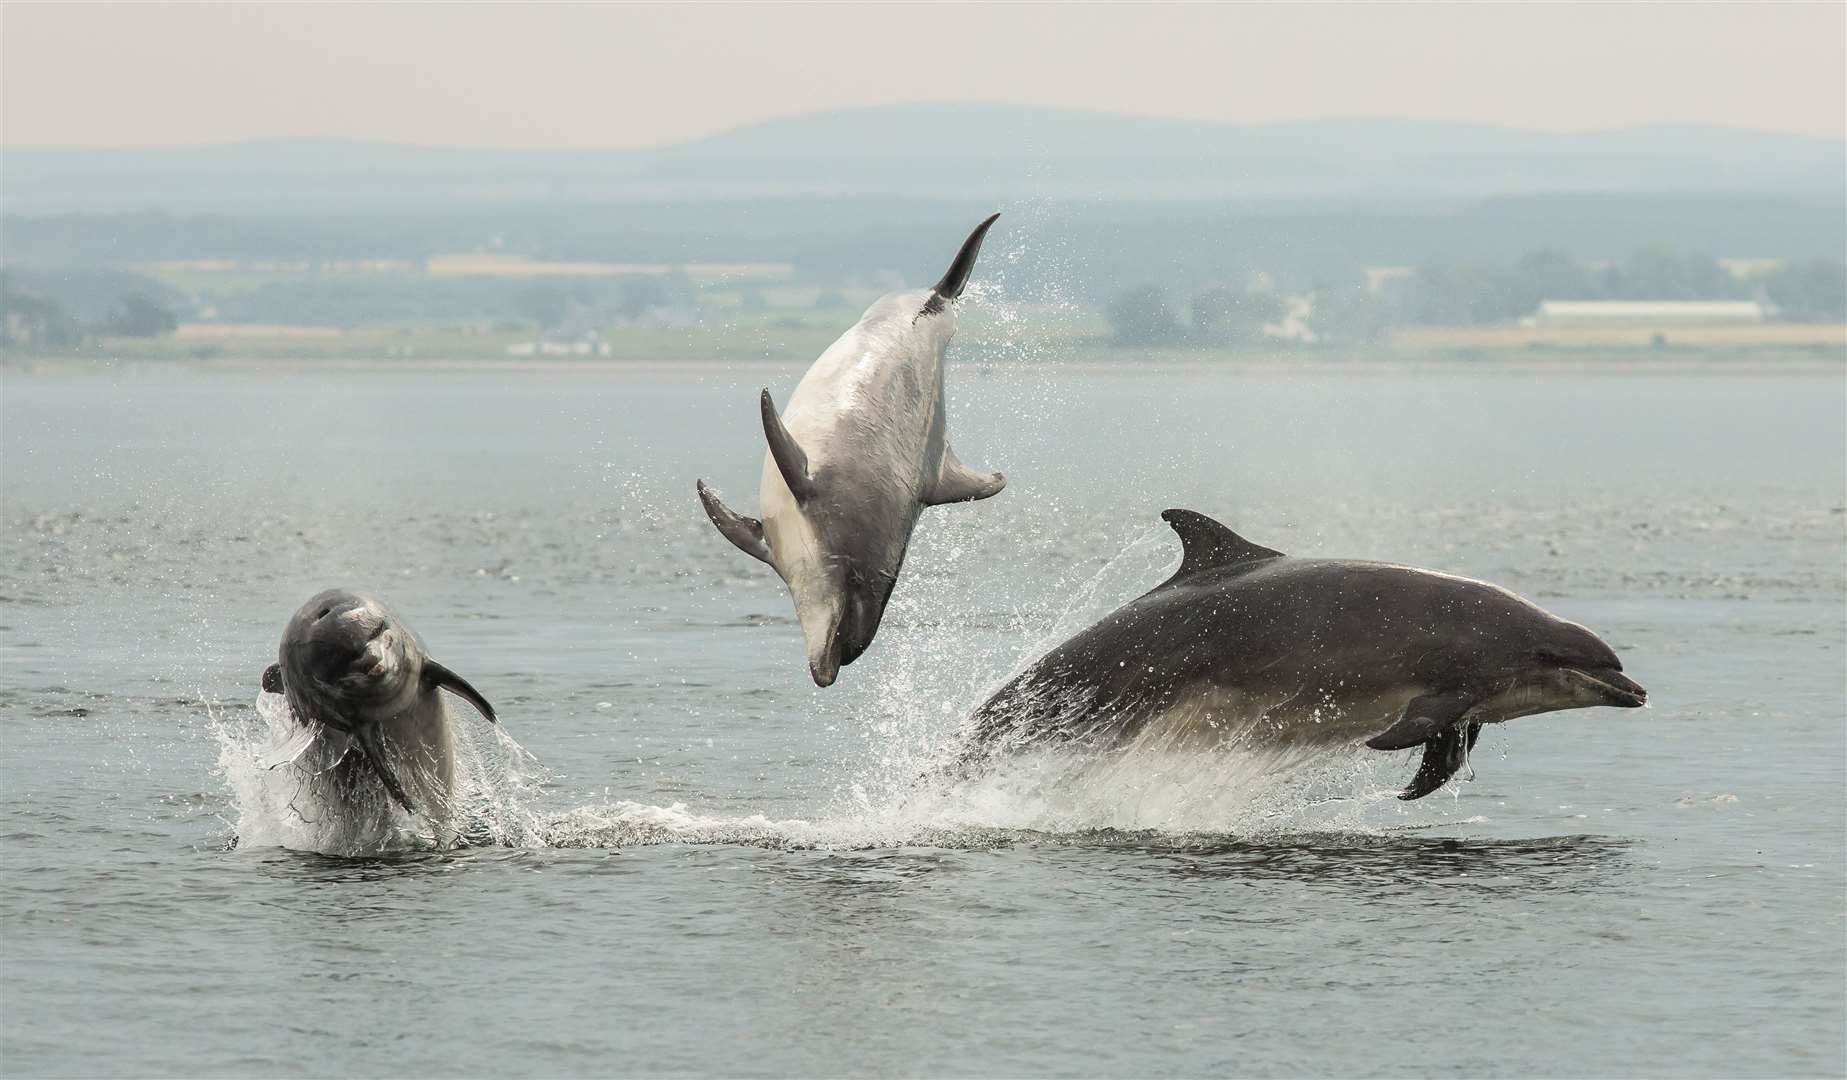 Dolphins are a regular sight.